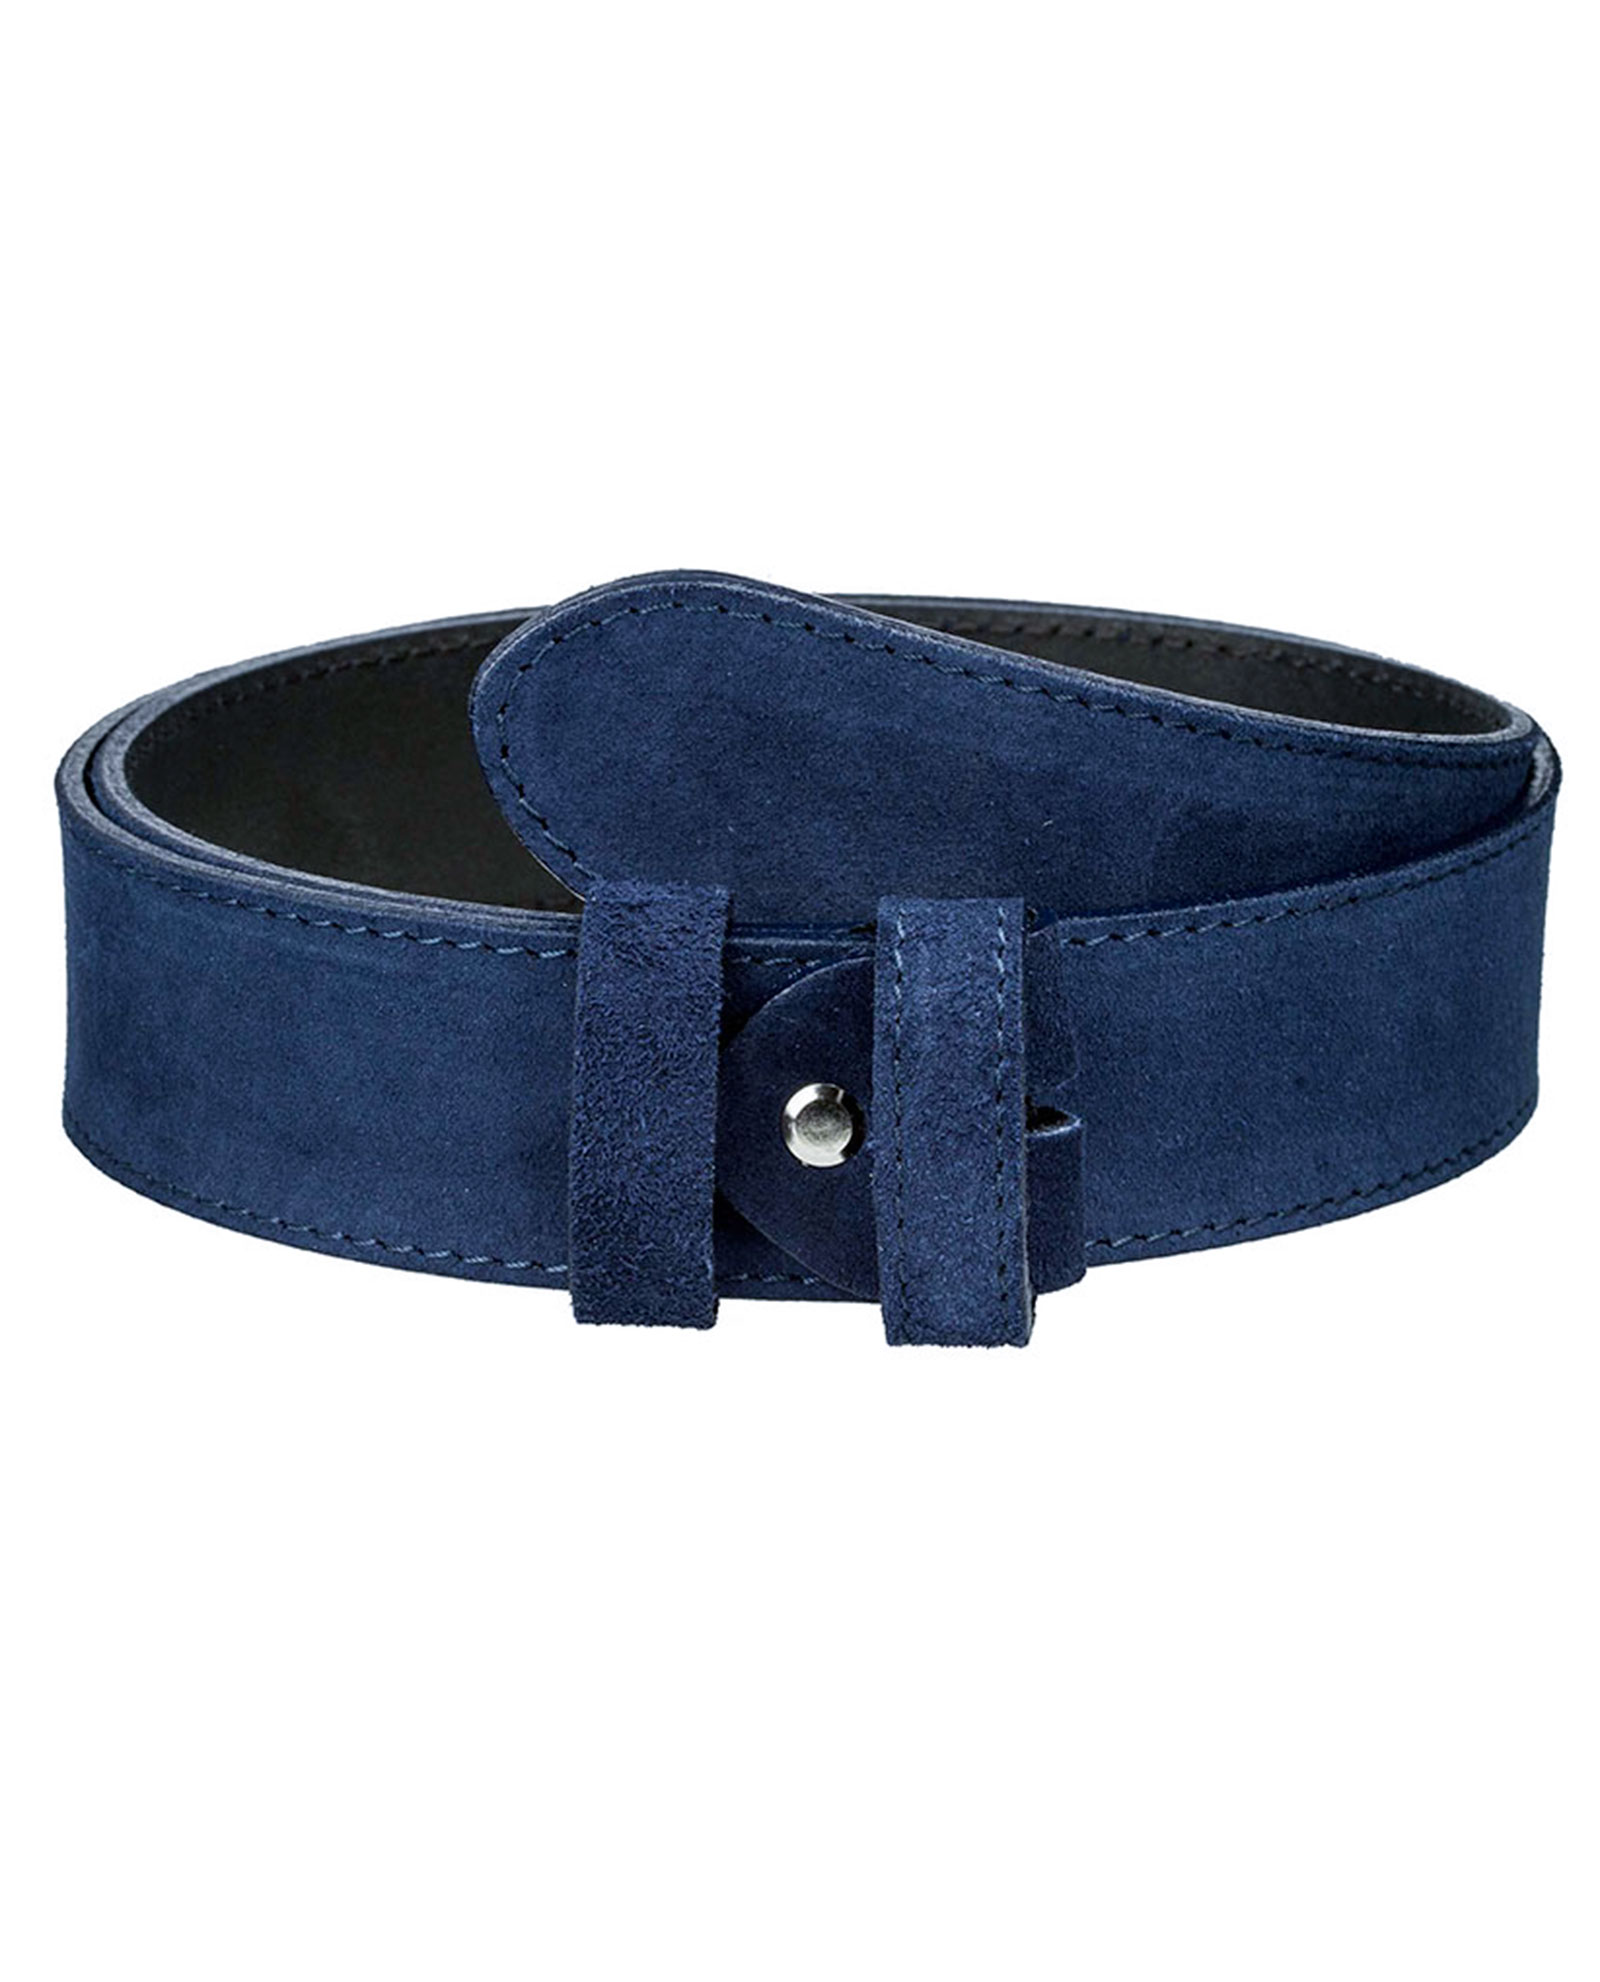 Buy Thick Blue Suede Belt | Adjustable Leather Strap | Free Shipping